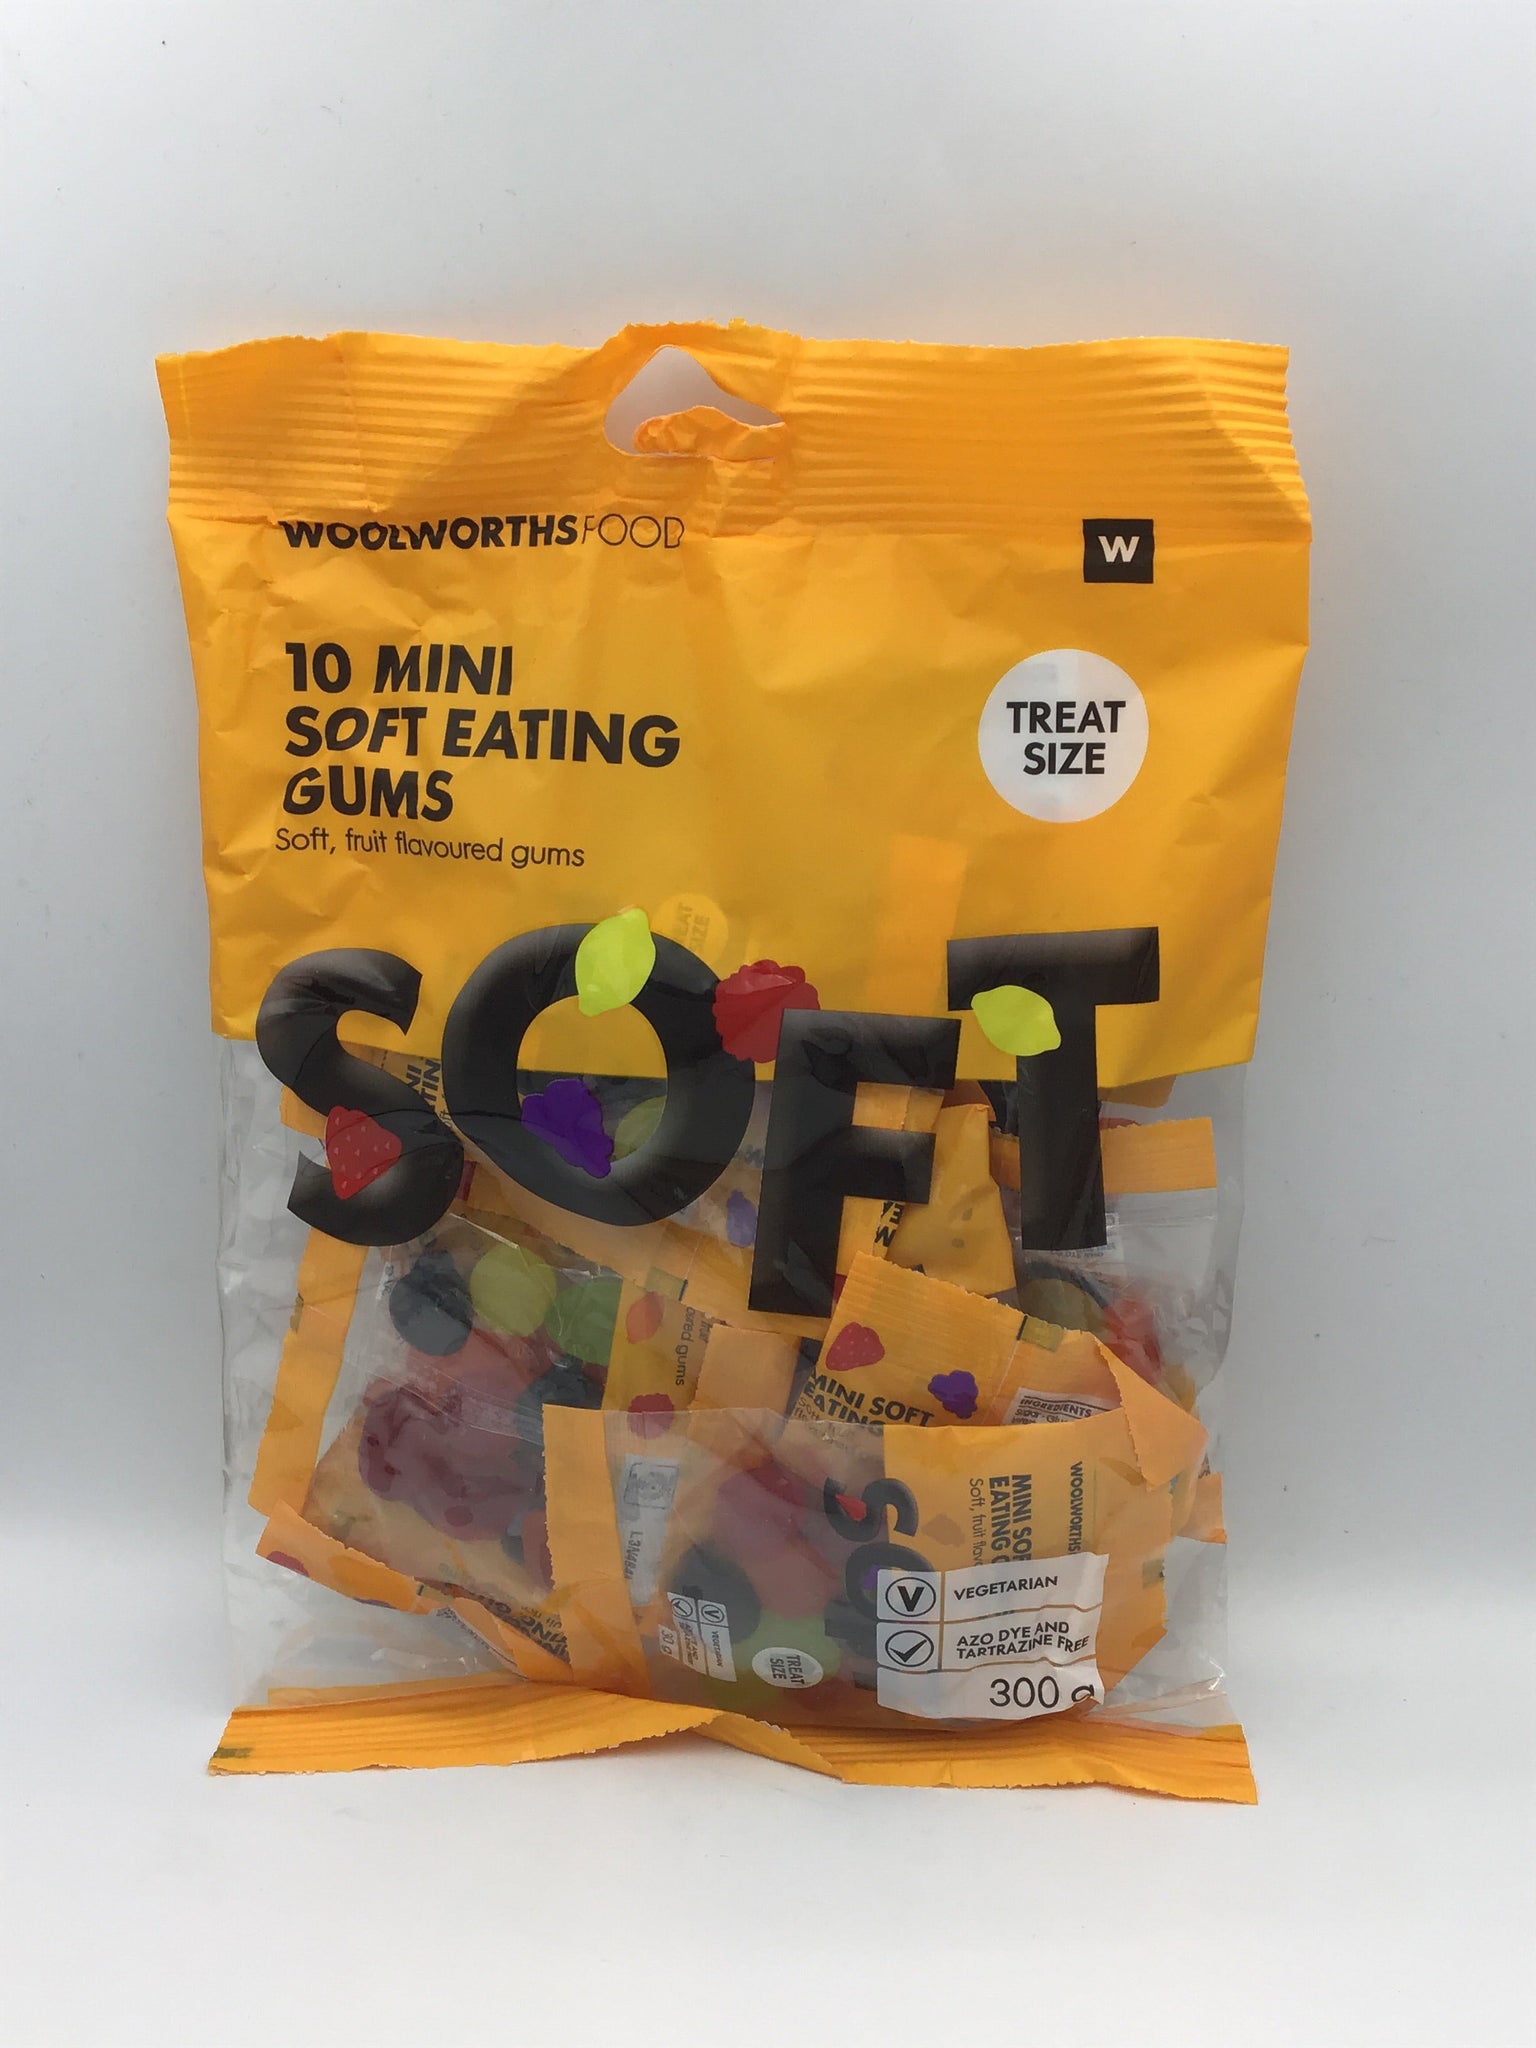 WOOLWORTHS 10 MINI SOFT EATING GUMS 10X30G